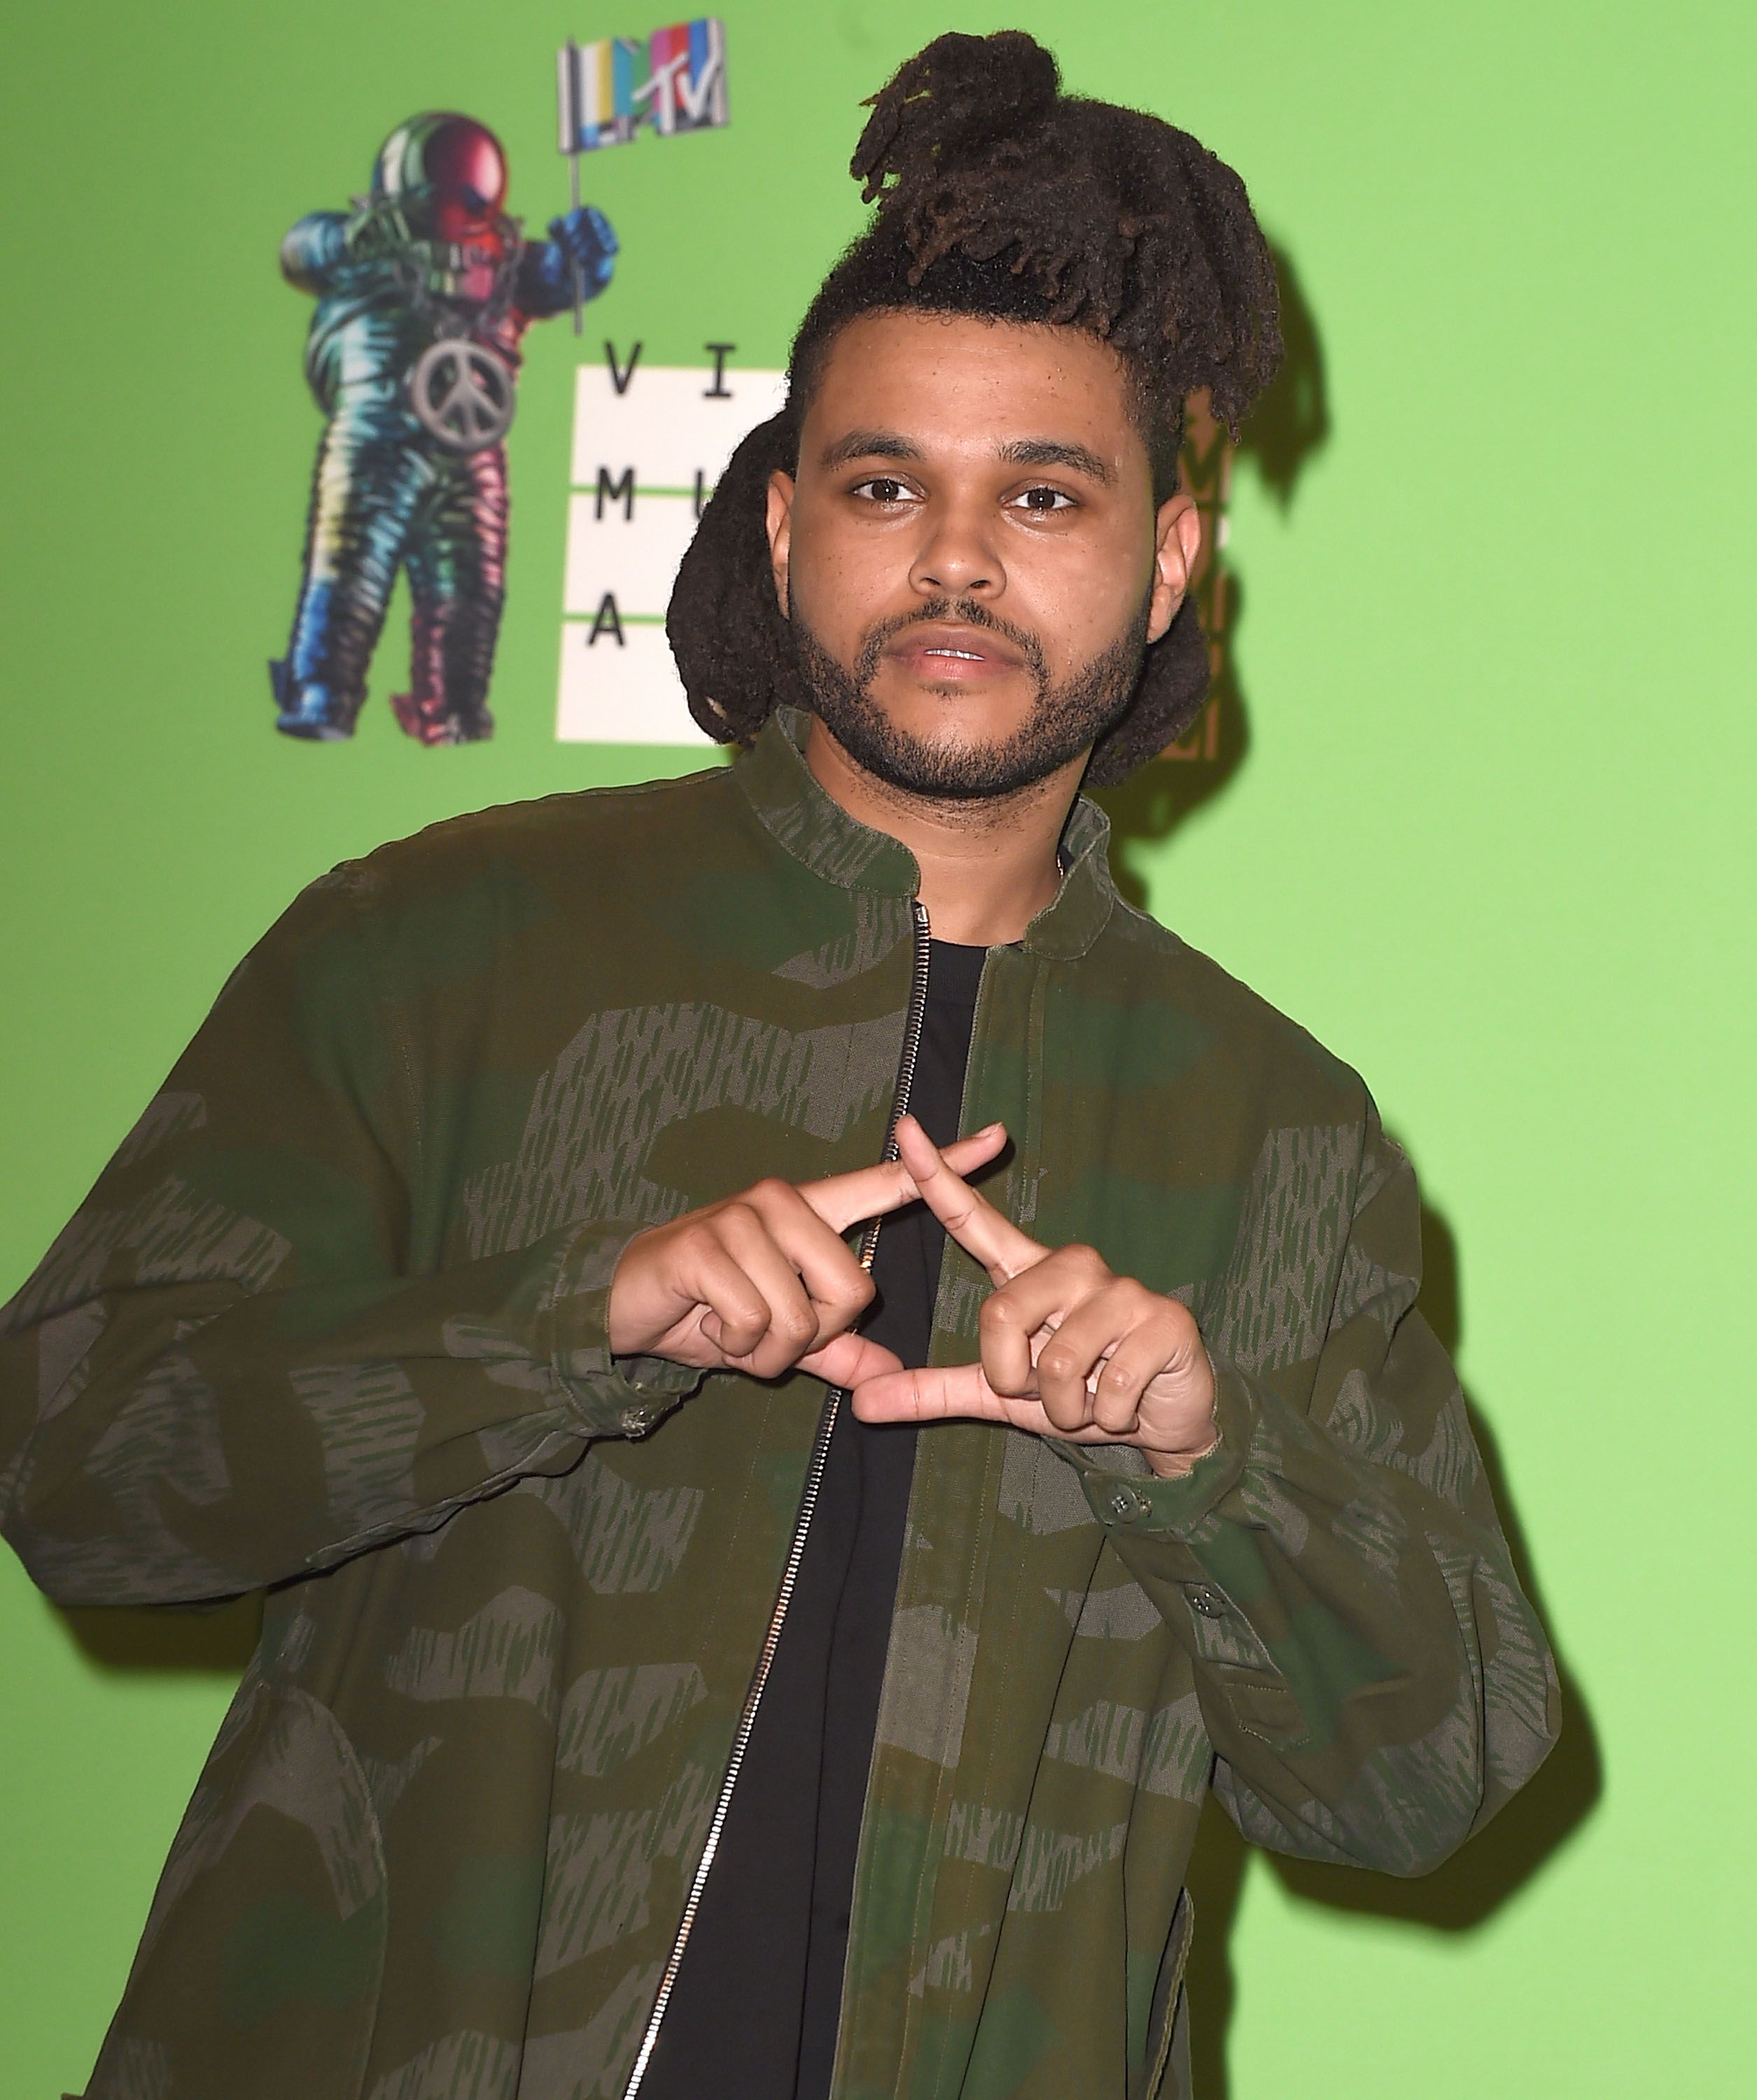 The Weeknd at the MTV Video Music Awards on August 30, 2015. | Photo: Getty Images